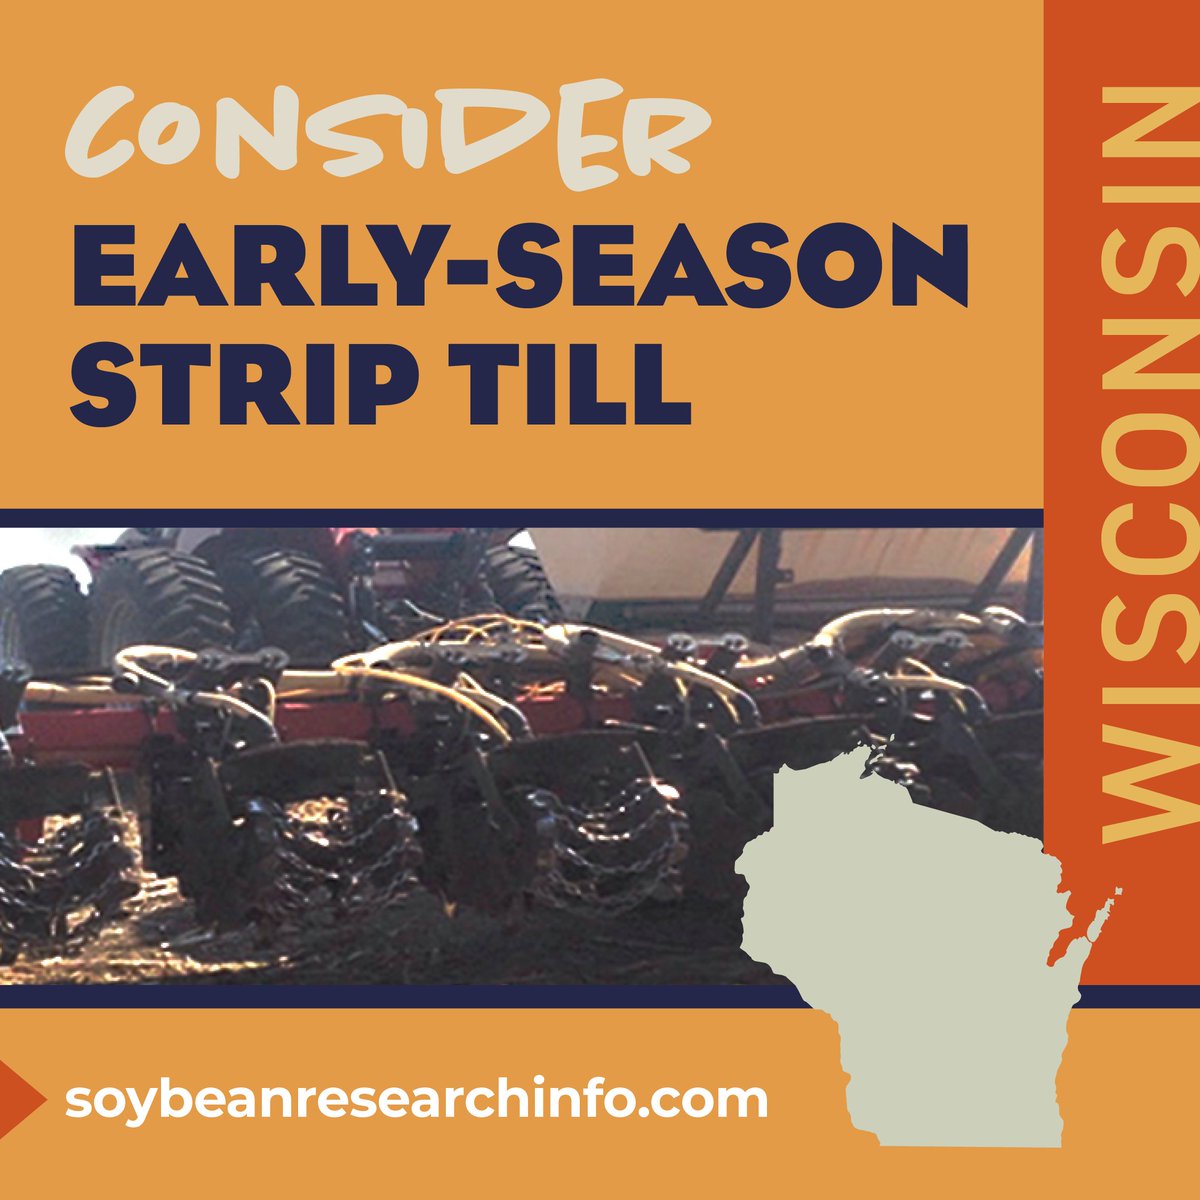 #SoyResearch funded by the @WISoyCheckoff delivers positive ROI to soybean farmers, like how planting conditions impact tillage systems in different row spacings, bit.ly/3zKIsxS, and more: bit.ly/33ZwBh1. #USSoy